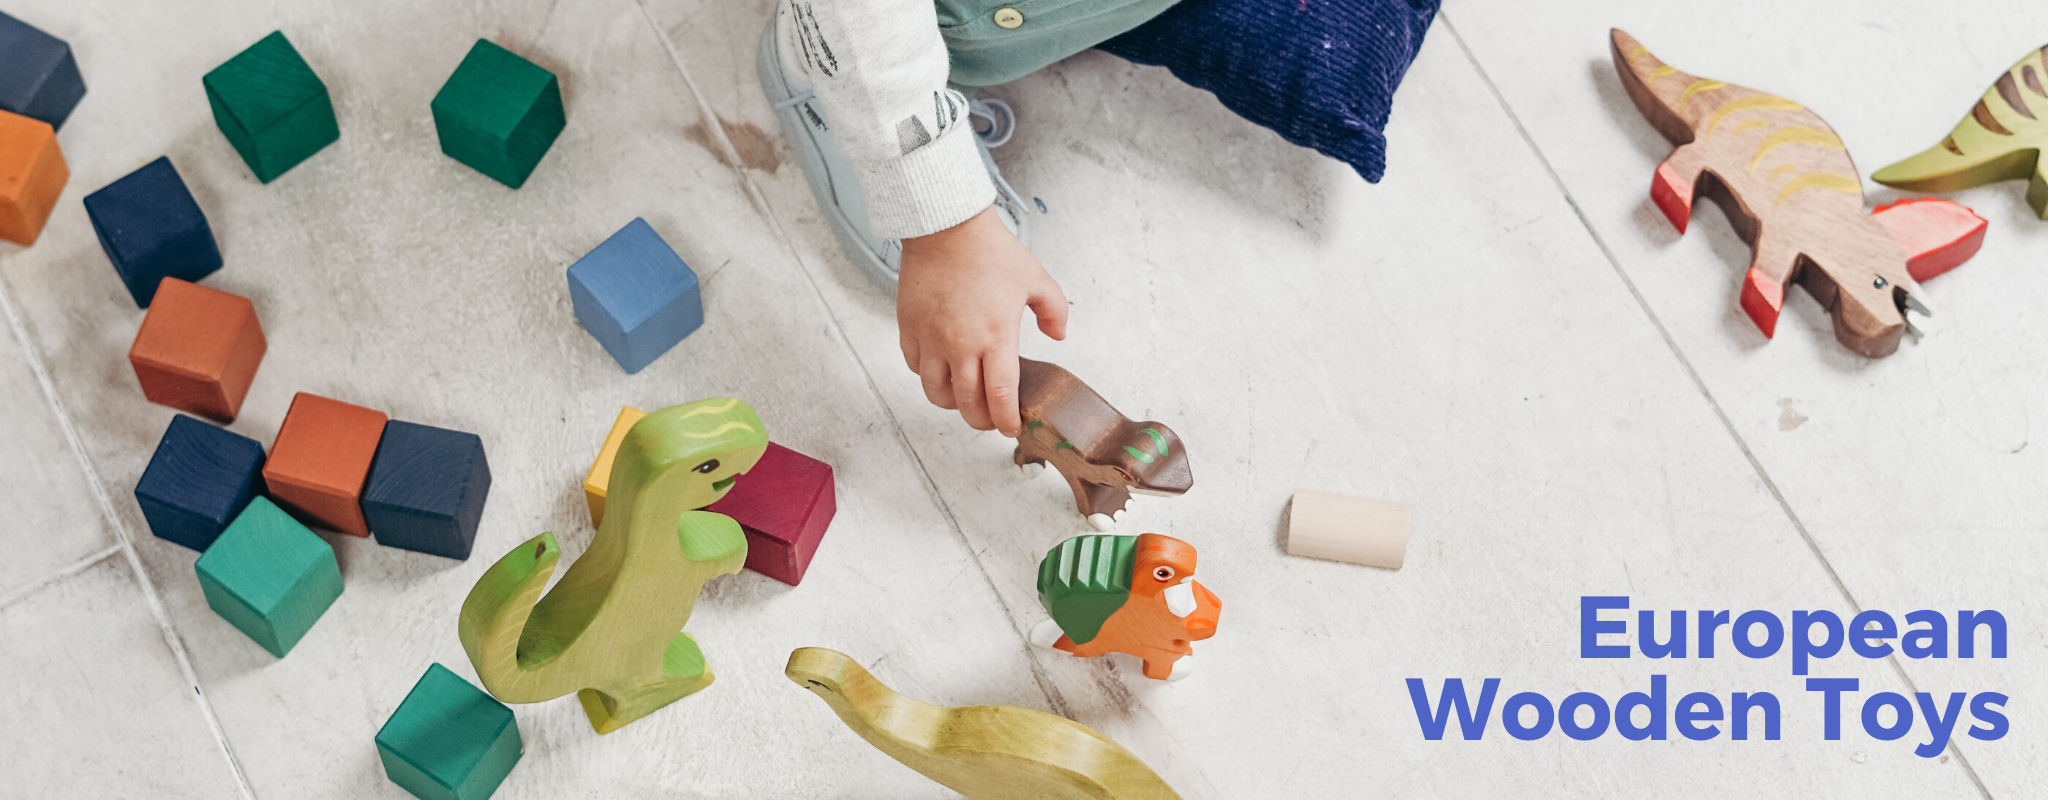 Gingerbread World Blog - Wooden Toys from Europe - Photo by cottonbro from Pexels - banner